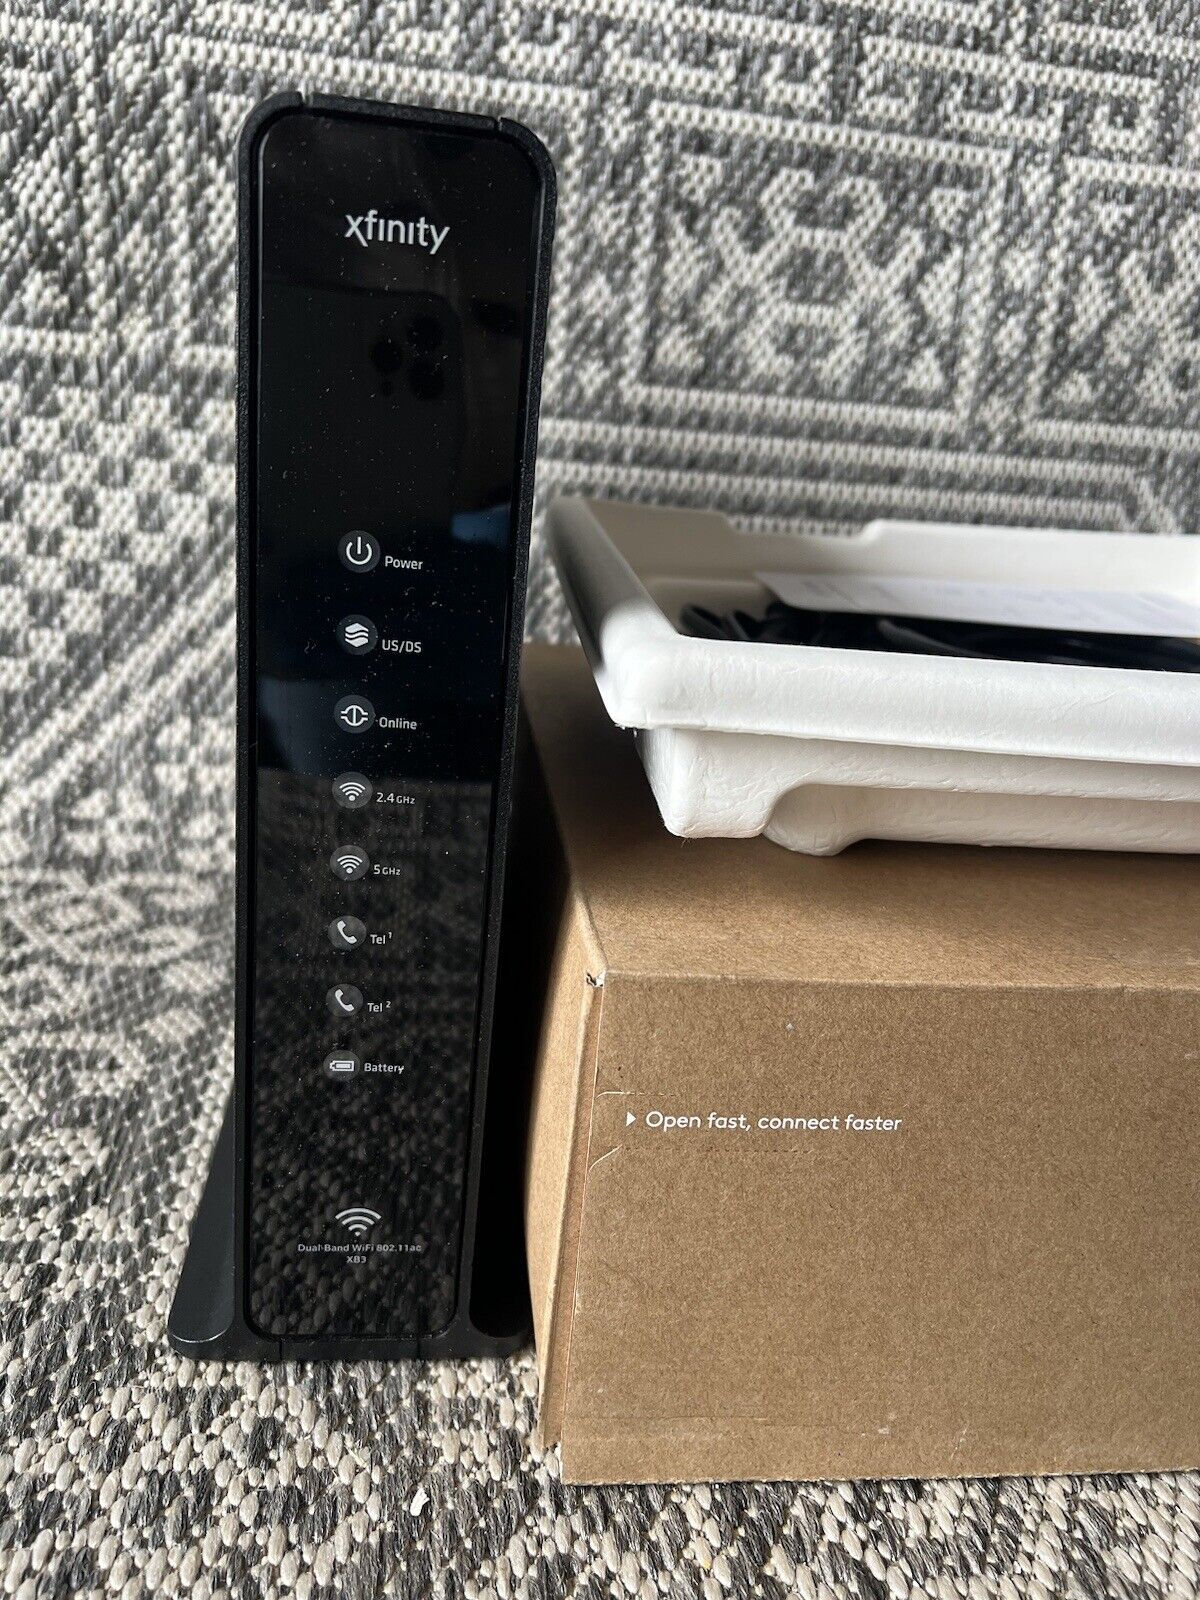 Xfinity WiFi Router/modem and TV tuner New.